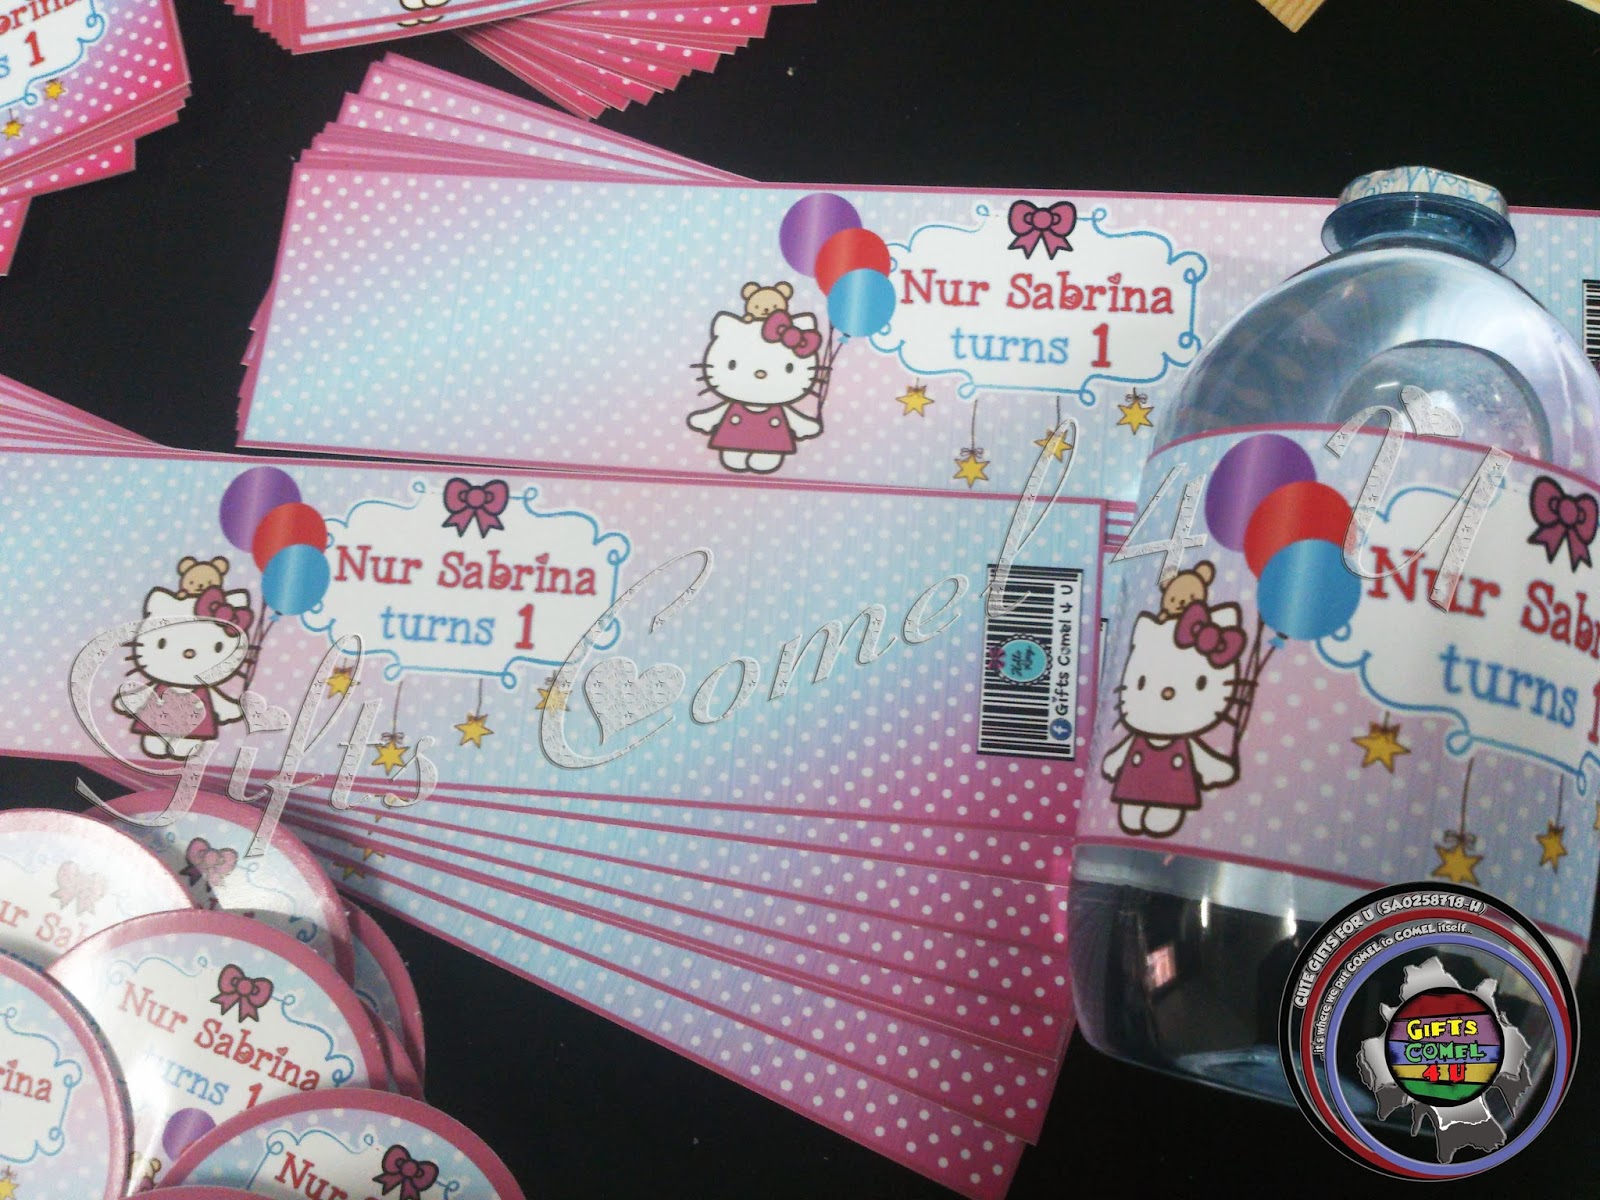 Gifts Comel 4 U: Bottle Label with Personalized Wrapper